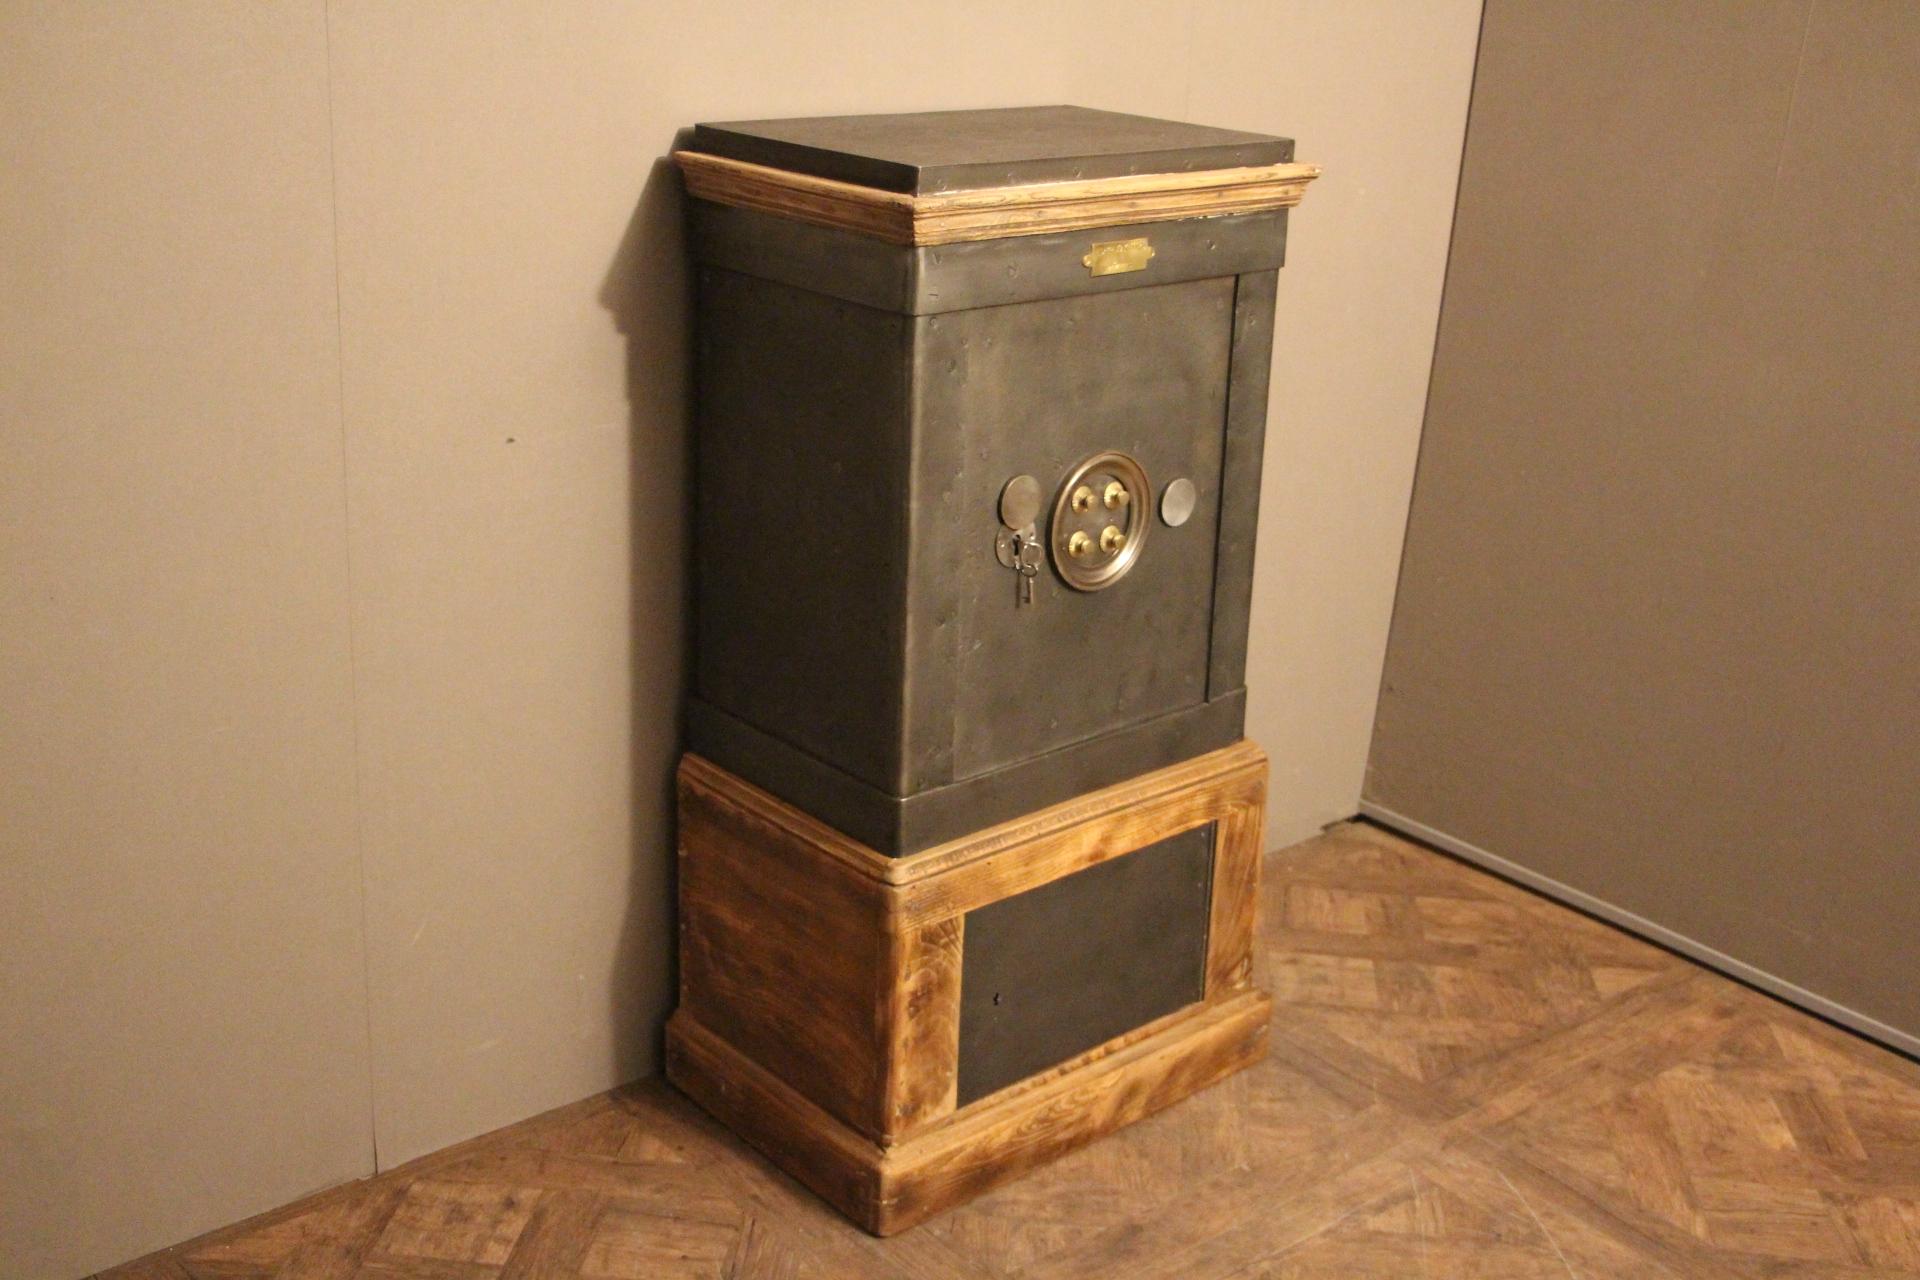 Beautiful French steel, wood and iron safe opening with its keys and its four letters' combination. Fully functional. It features two doors, one on the top and another one in its base.
The top door reveals a very sturdy mechanism closing thanks to